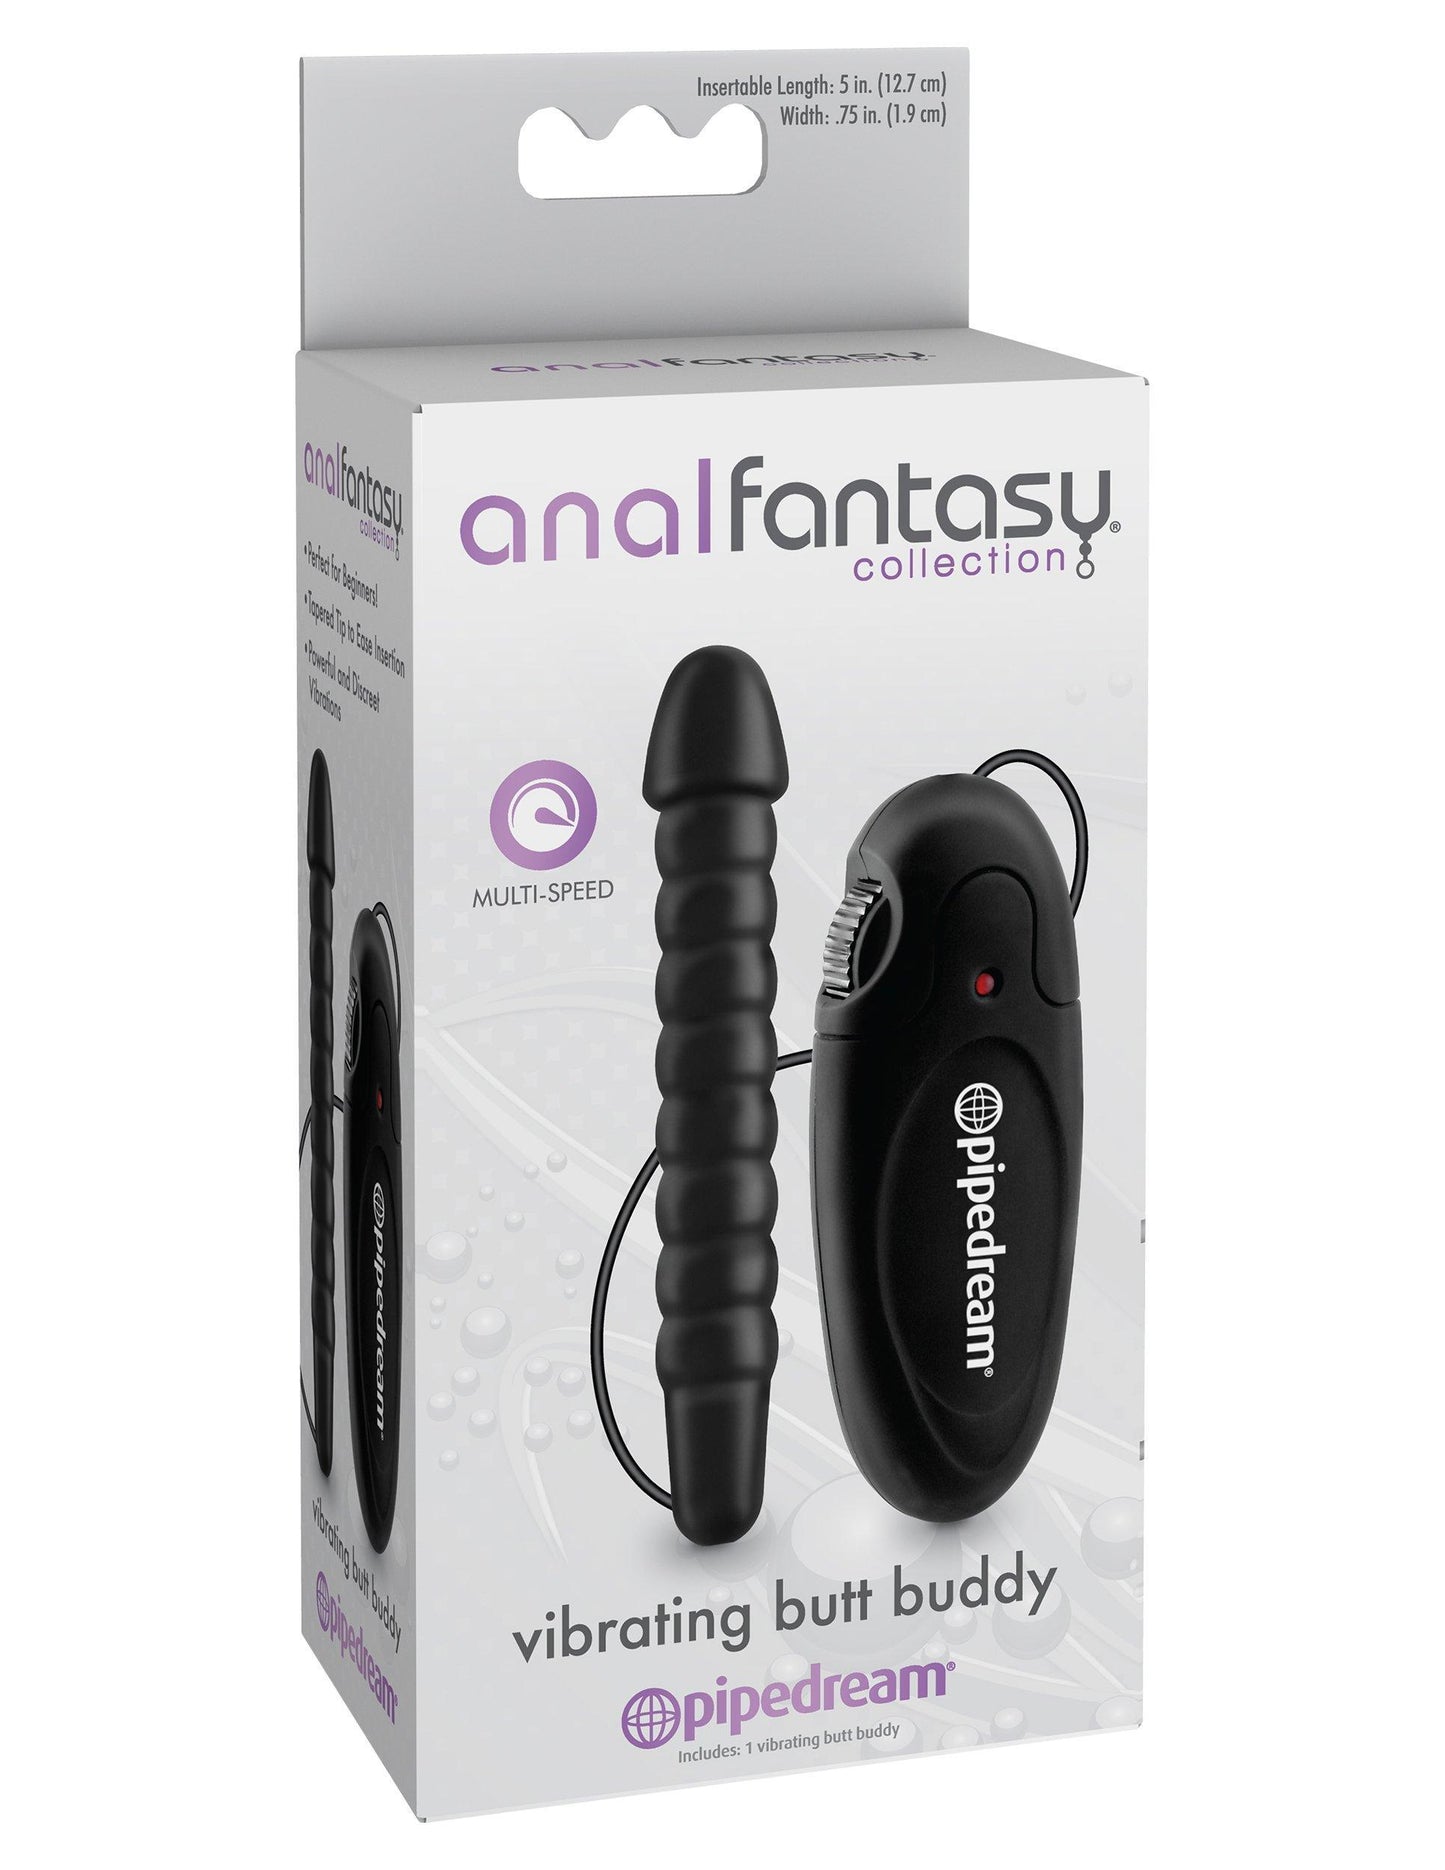 Anal Fantasy Collection Vibrating Butt Buddy - Black - My Sex Toy Hub